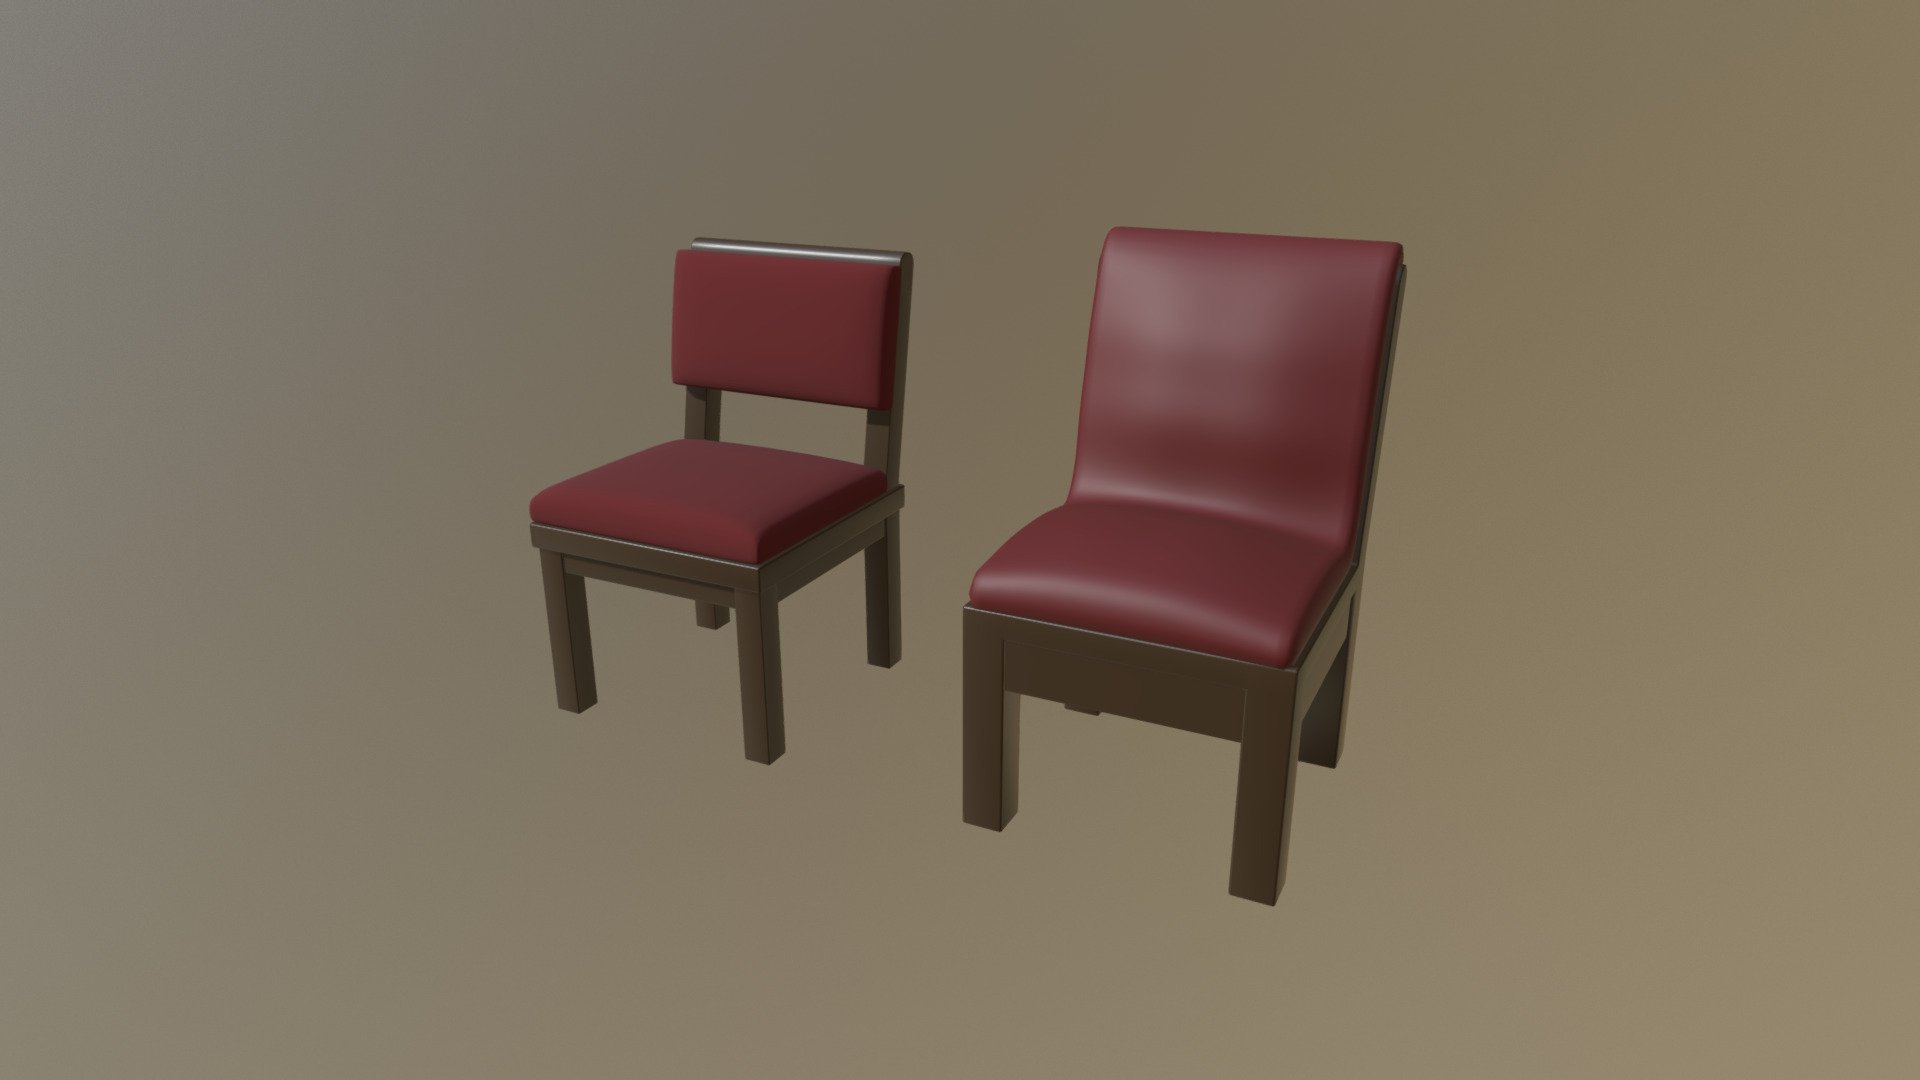 Church chair set that was created in Blender. This is a pack of the two church chairs that I have created for the Church Asset Pack V2. This set is for the people who may want just the chairs from the asset pack and nothing else. These models use PBR textures and were made using the metalness workflow. Included with the models are several PBR textures that can easily be edited in photo editing software. You also get UVLayout maps to see how each model is divided and textured 3d model